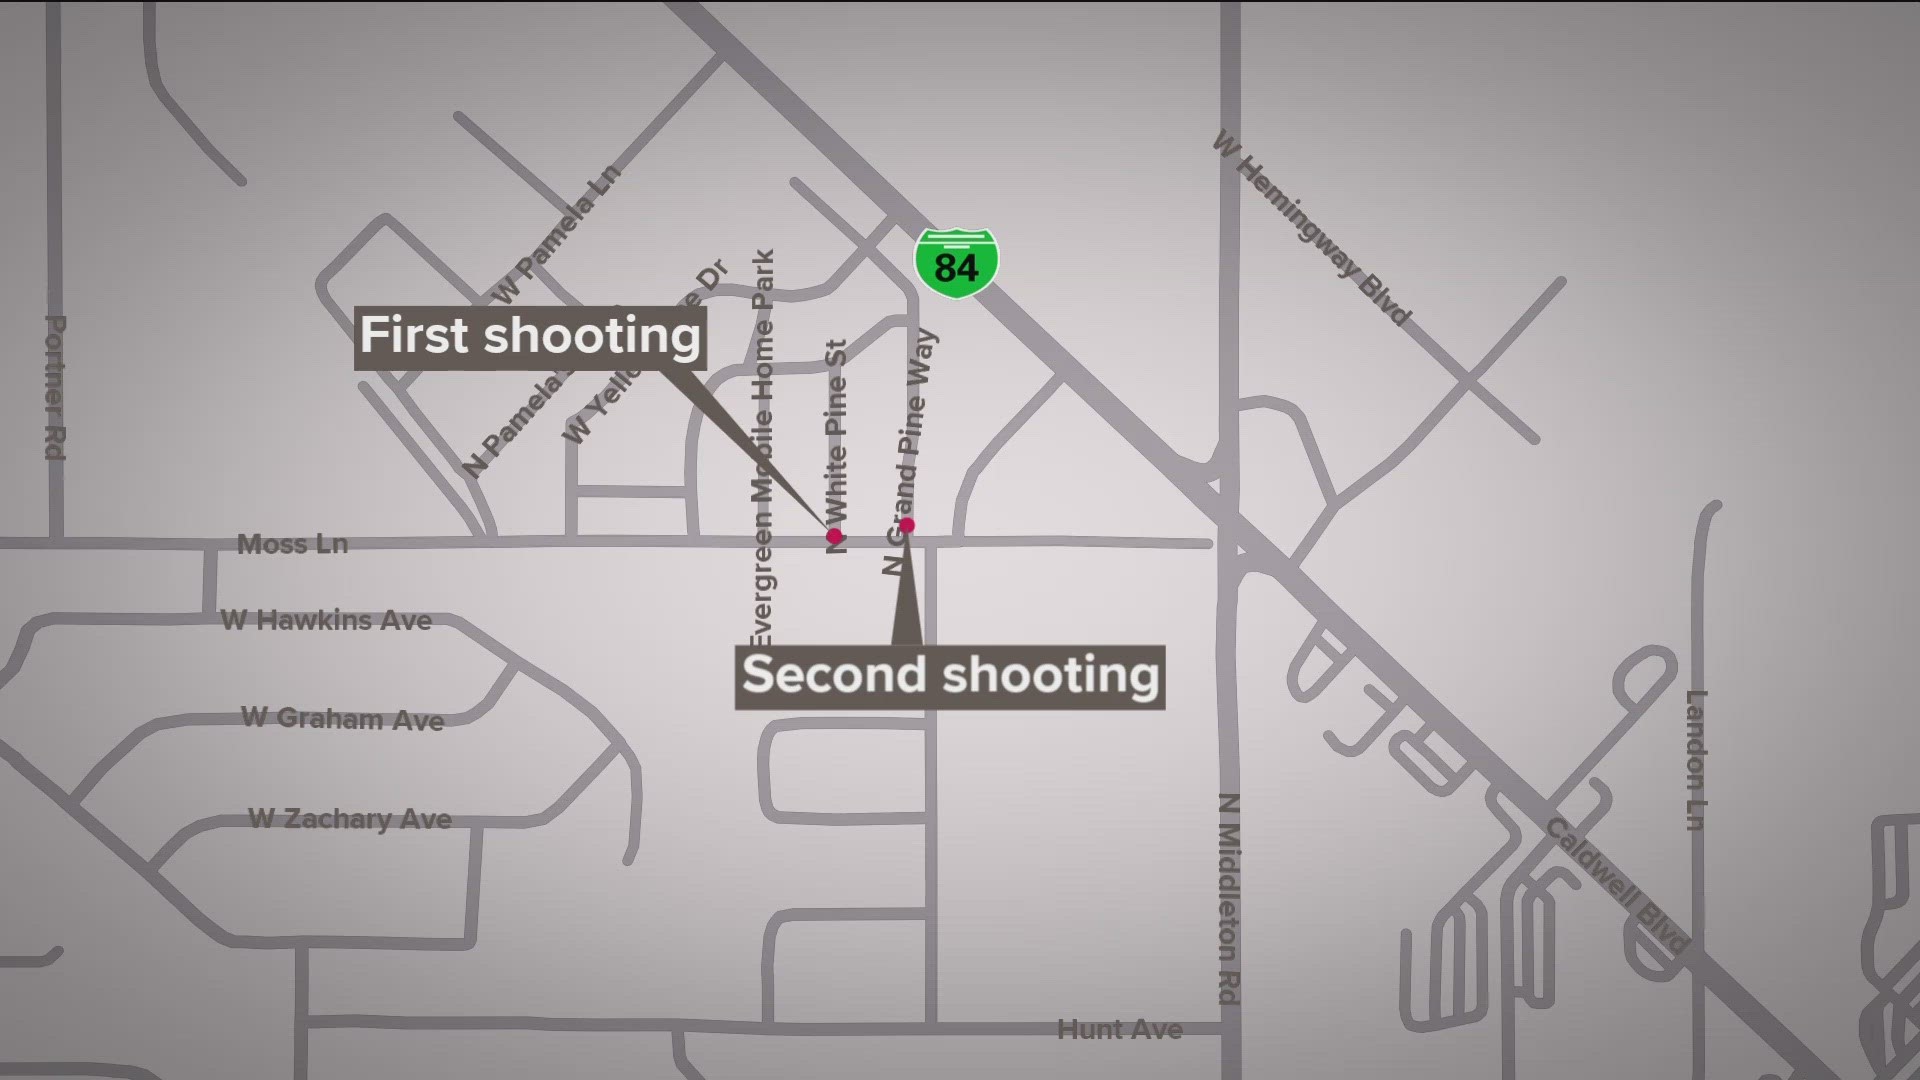 One man is dead, and another is seriously injured in two separate gang-related shootings that occurred in a Nampa trailer park Monday morning.